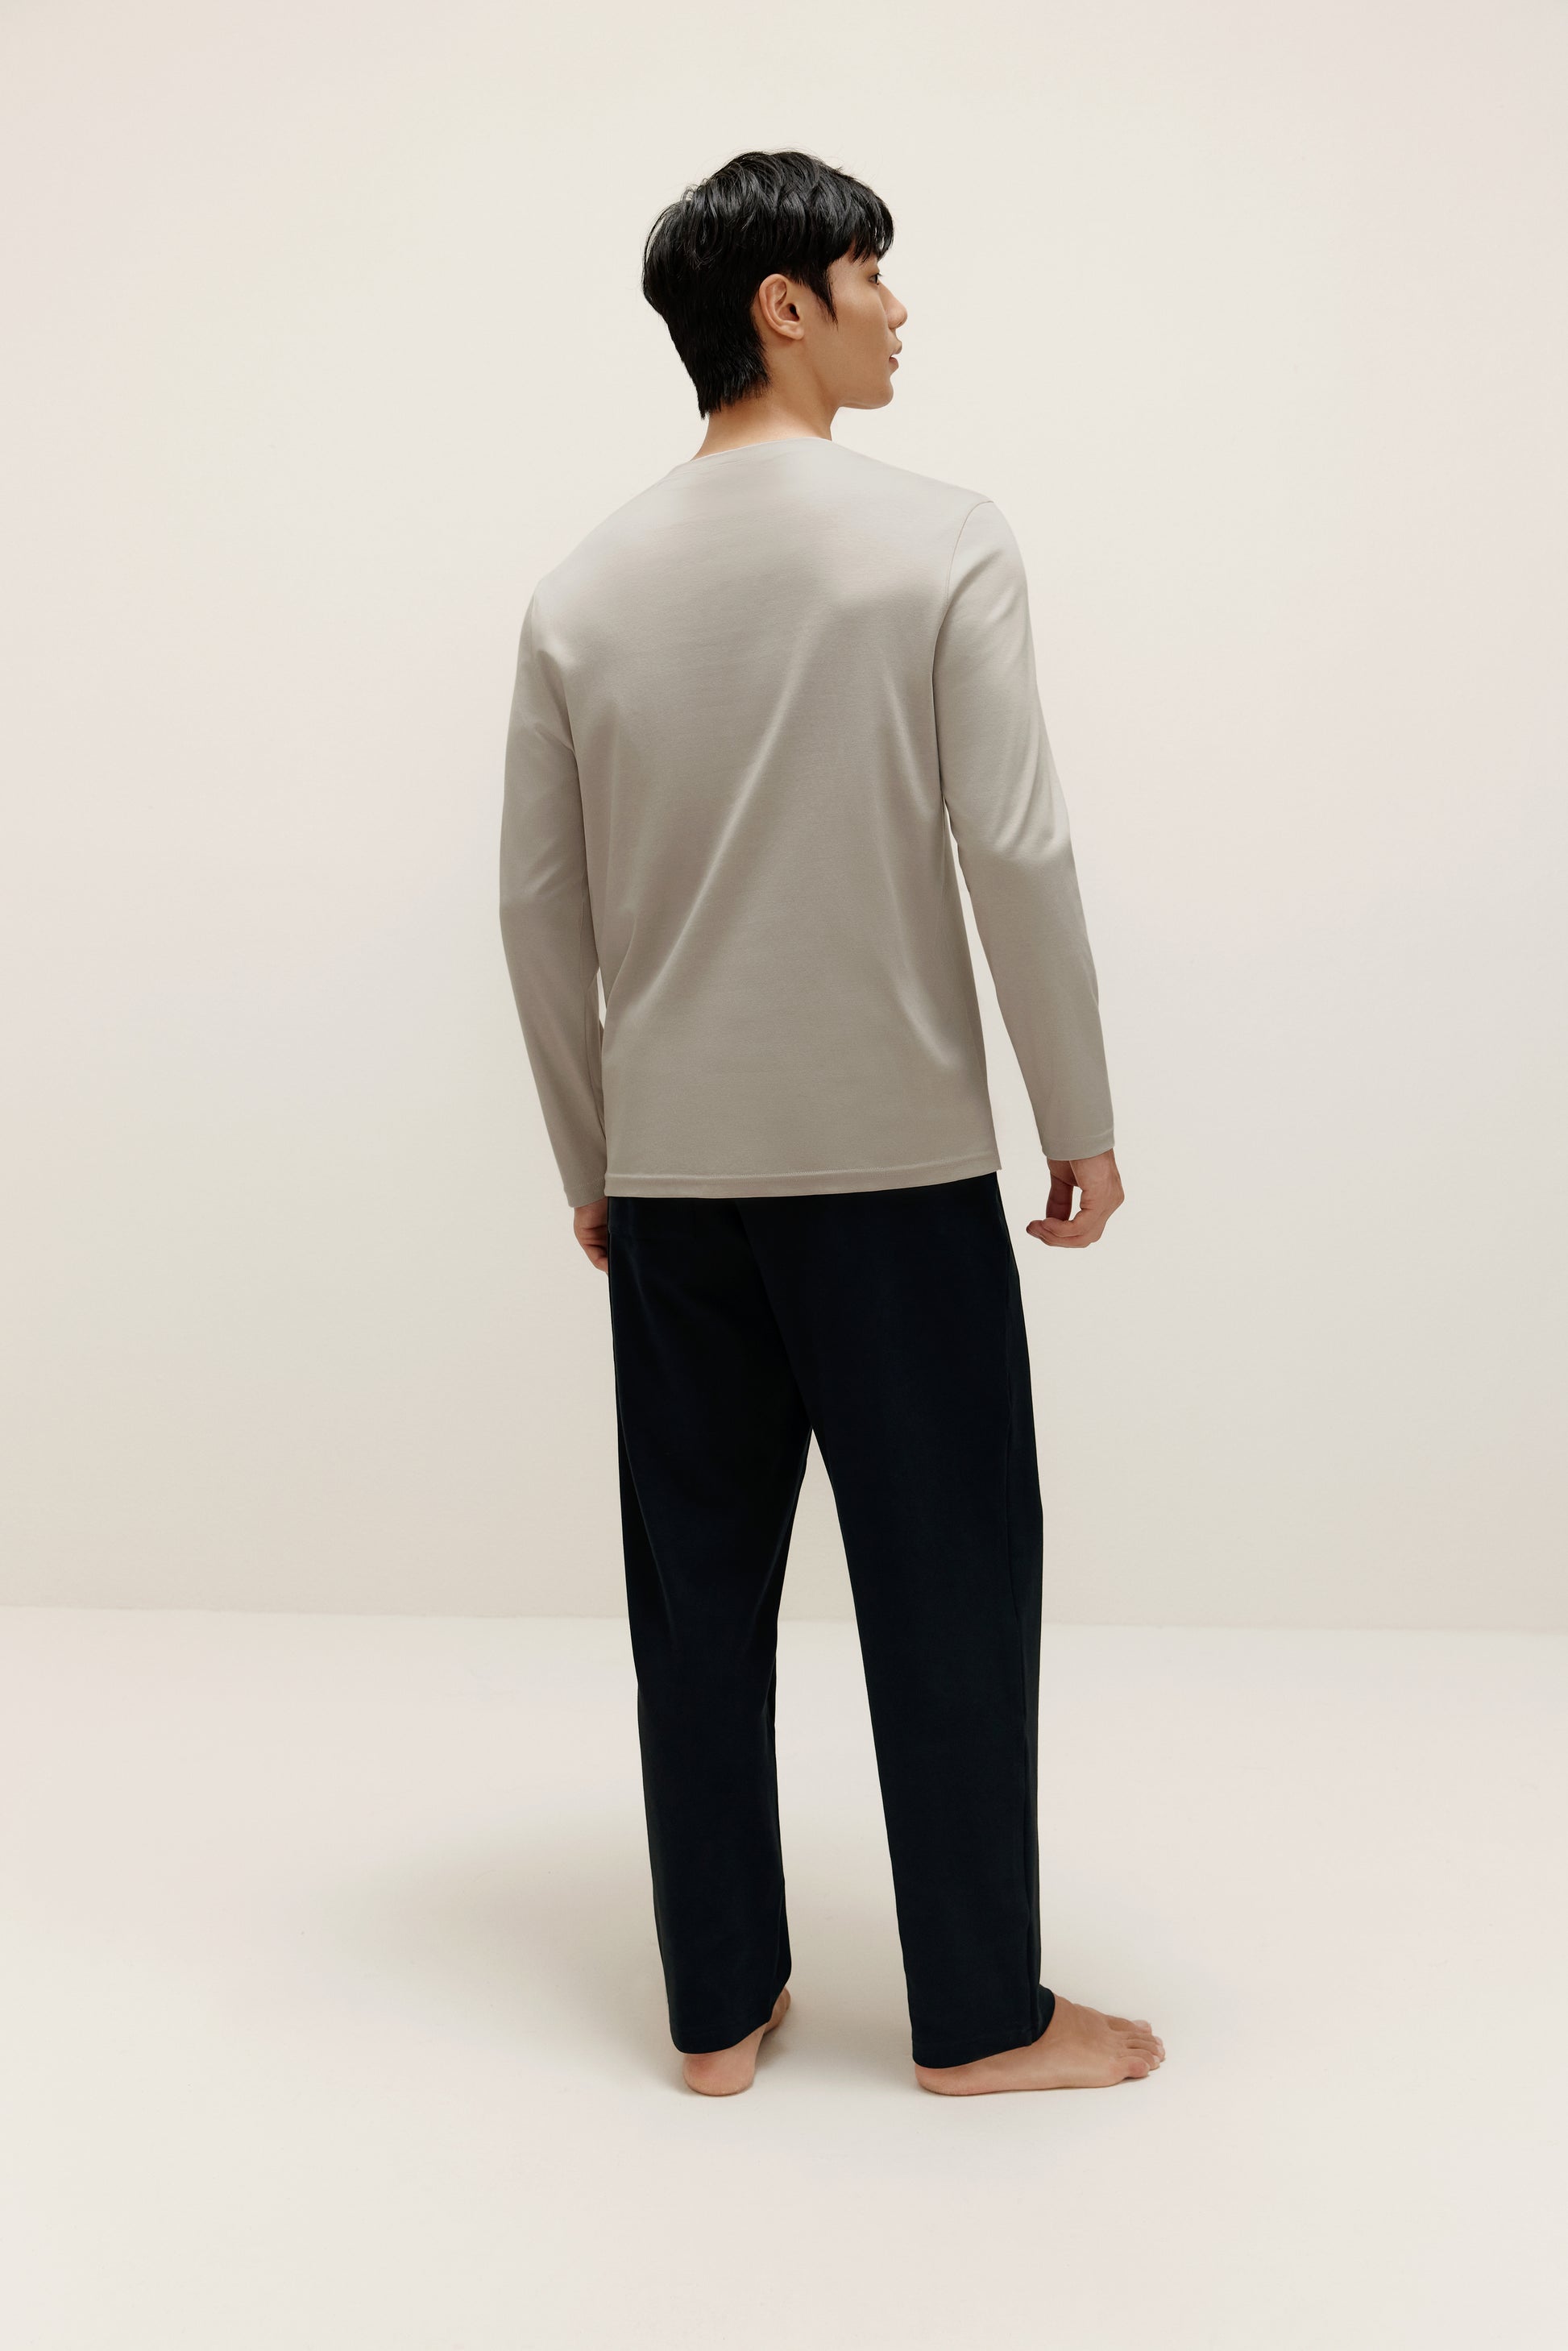 back of man wearing a grey long sleeve and black pants